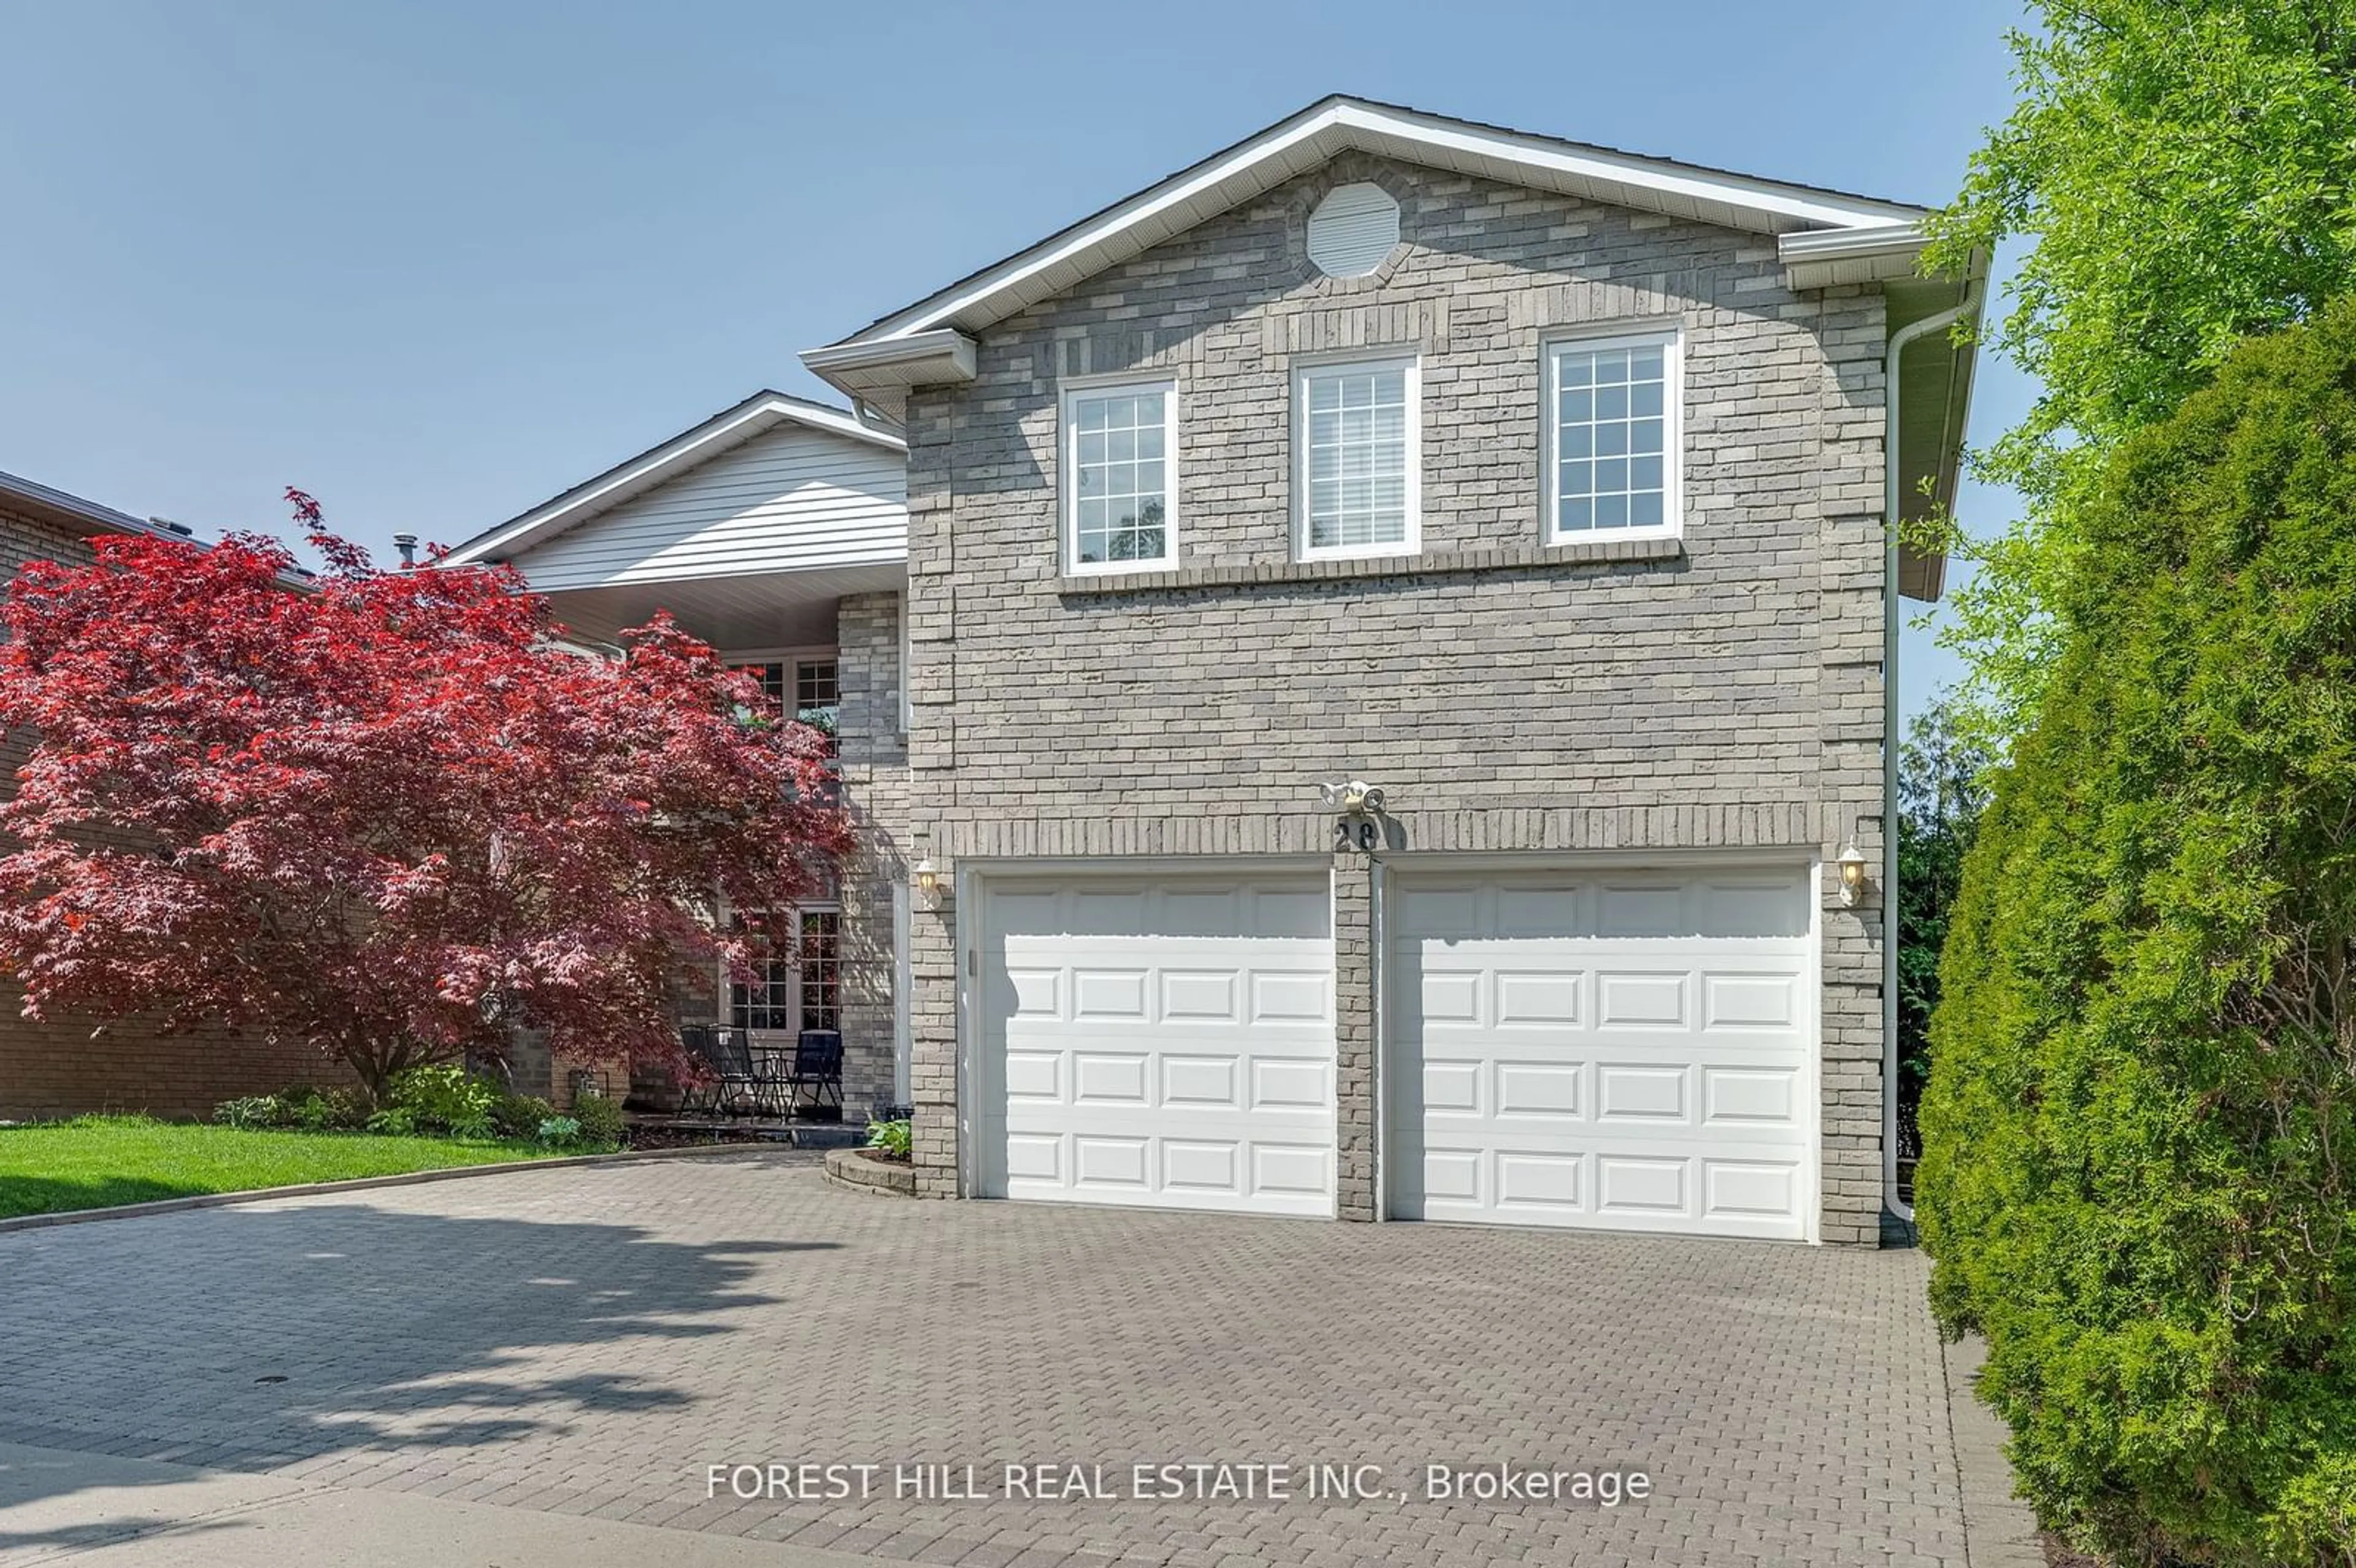 Home with brick exterior material for 28 Dunvegan Dr, Richmond Hill Ontario L4C 6K1